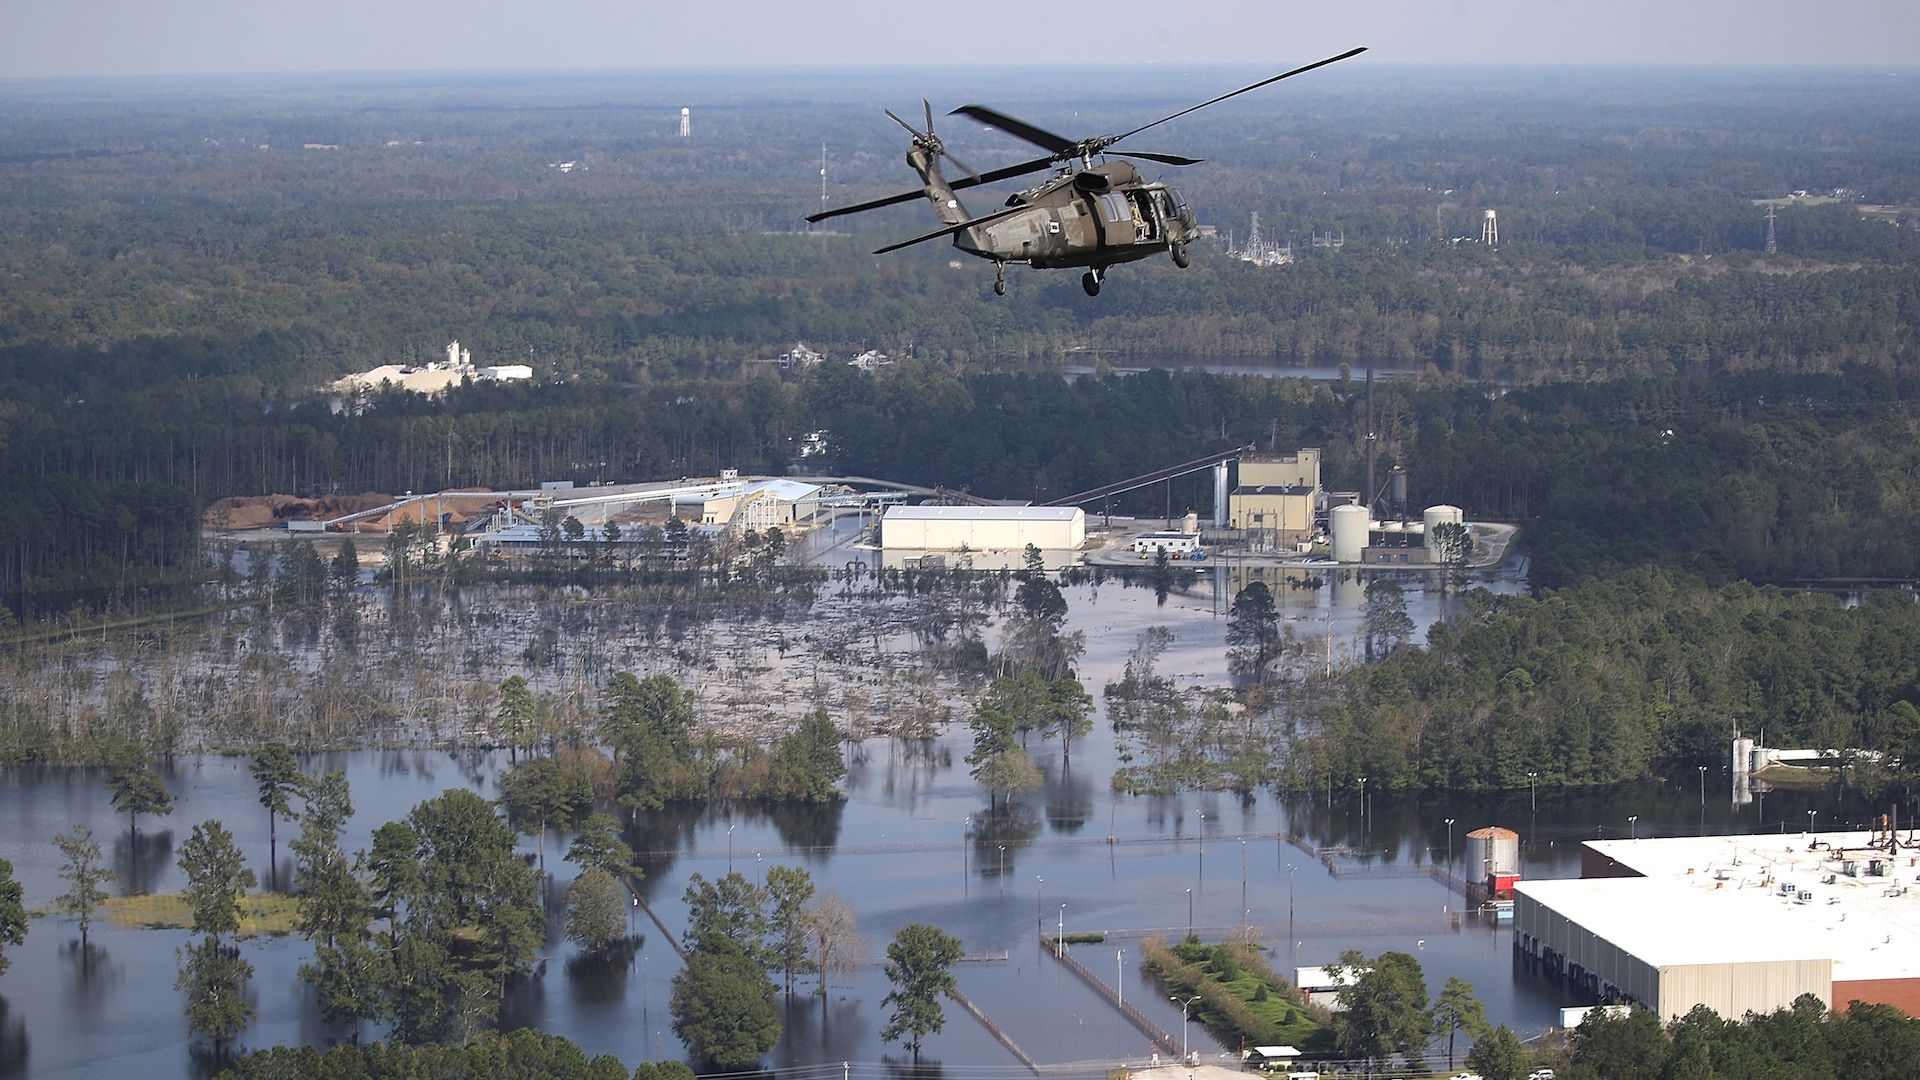 Hurricane Florence flooding: A U.S. Army helicopter flies over homes and businesses flooded by heavy rains from Hurricane Florence on September 20, 2018 in Lumberton, North Carolina.